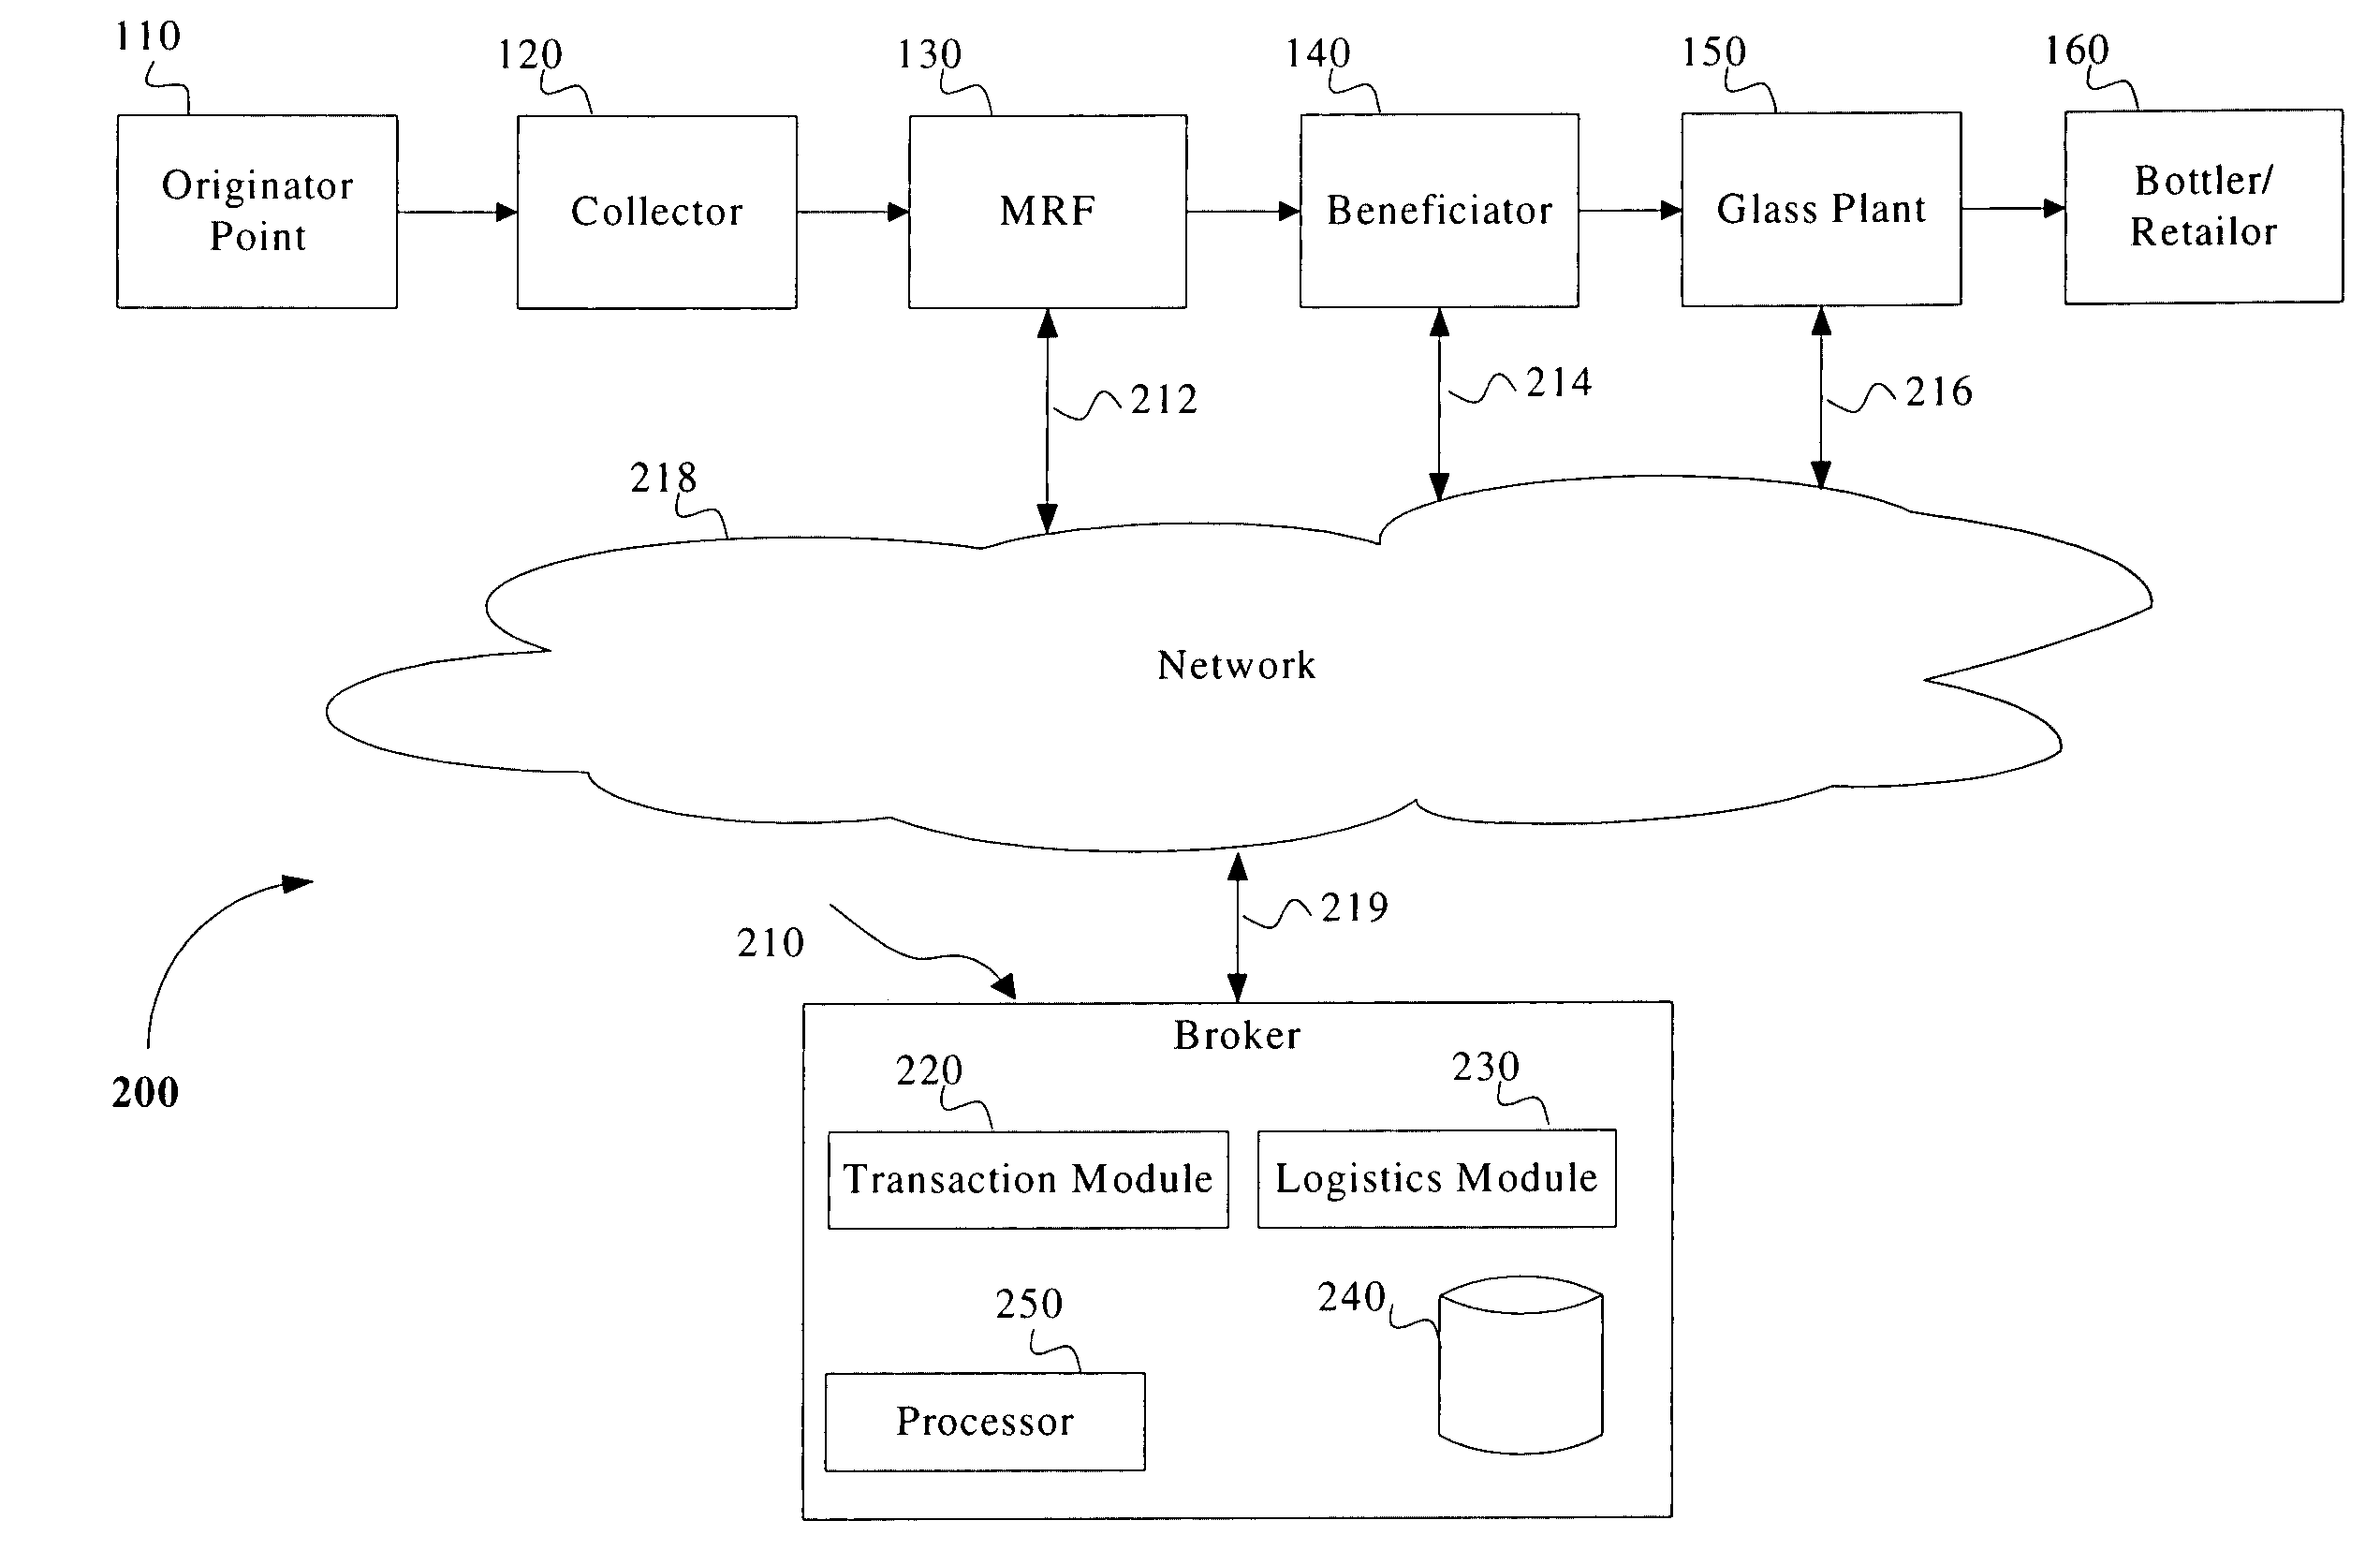 Method, system and computer readable medium for brokering the purchase and sale of glass cullet